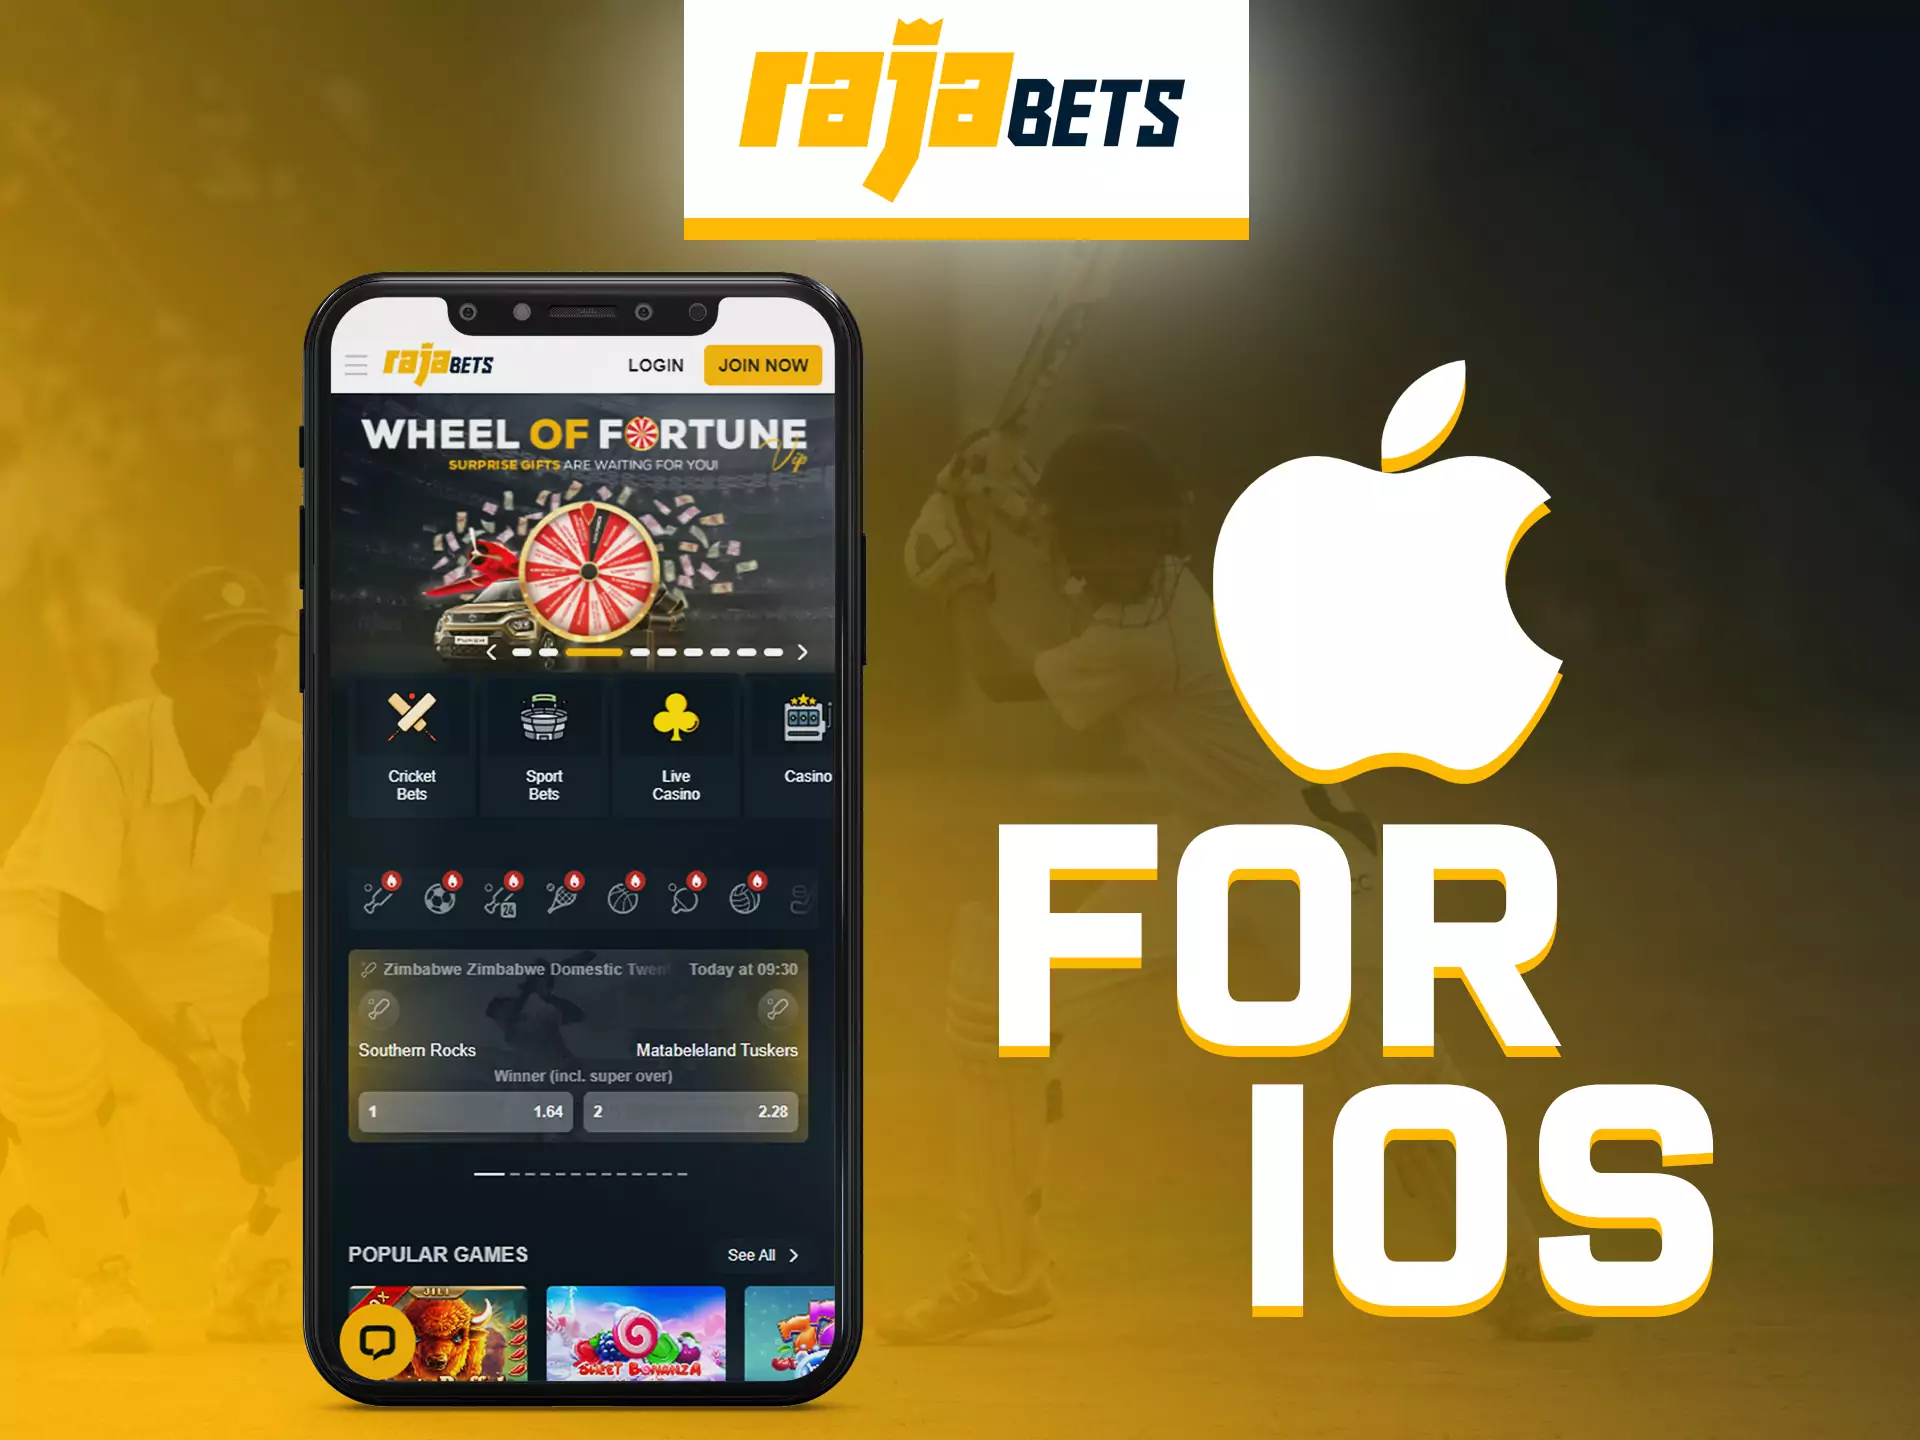 With Rajabets on your iOS device, you can easily play and bet anywhere.